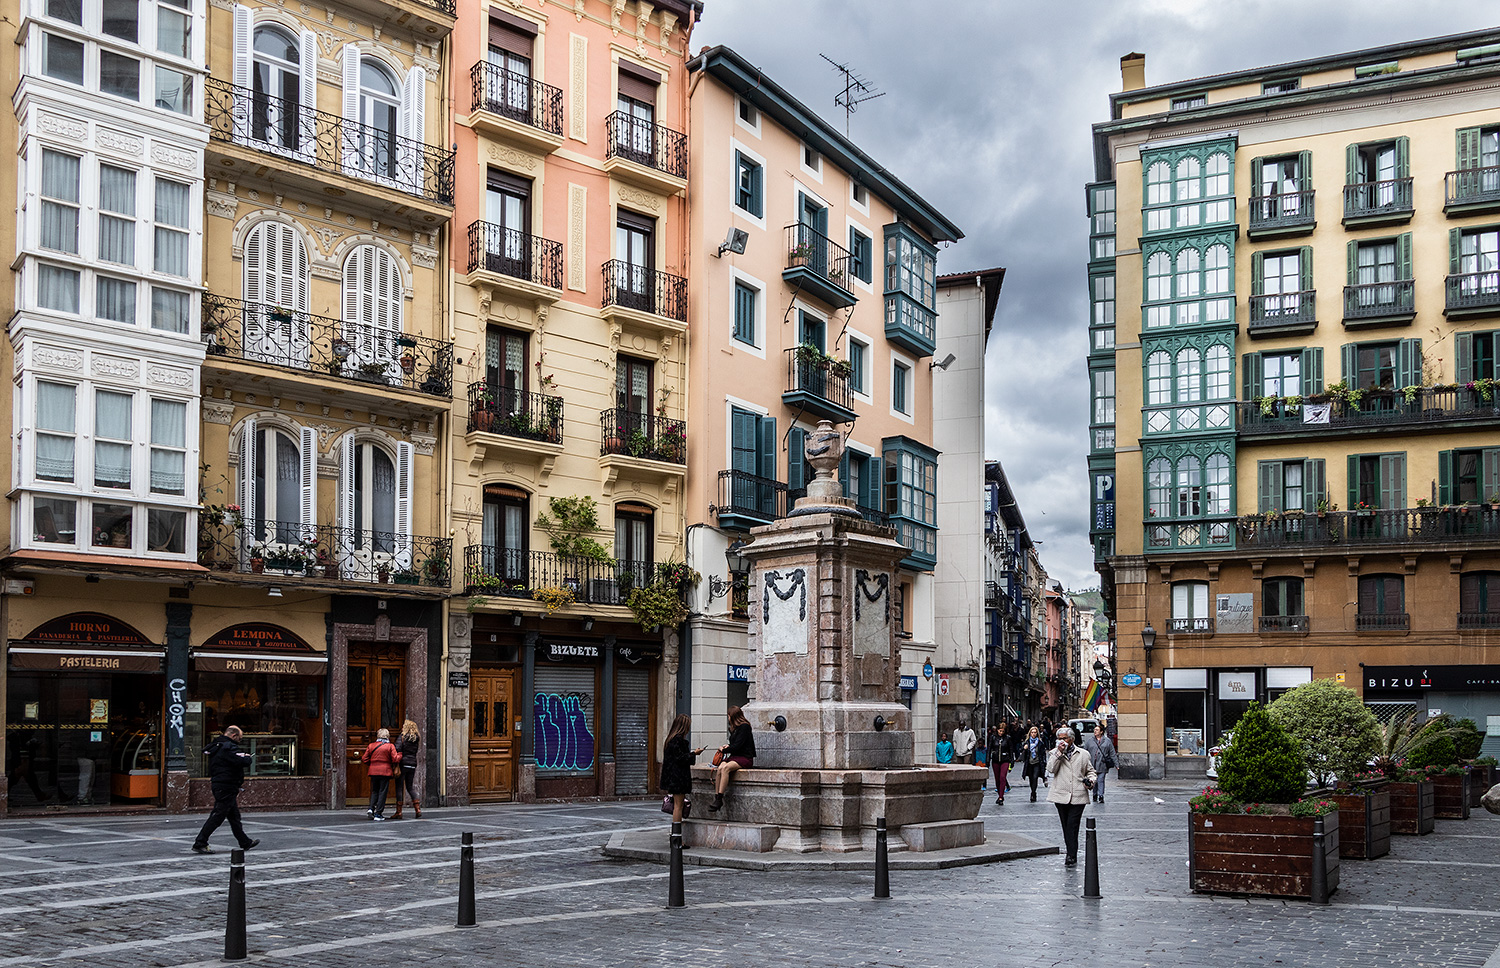 Strolling around the Casco Viejo in Bilbao is one of those experiences you can't miss.